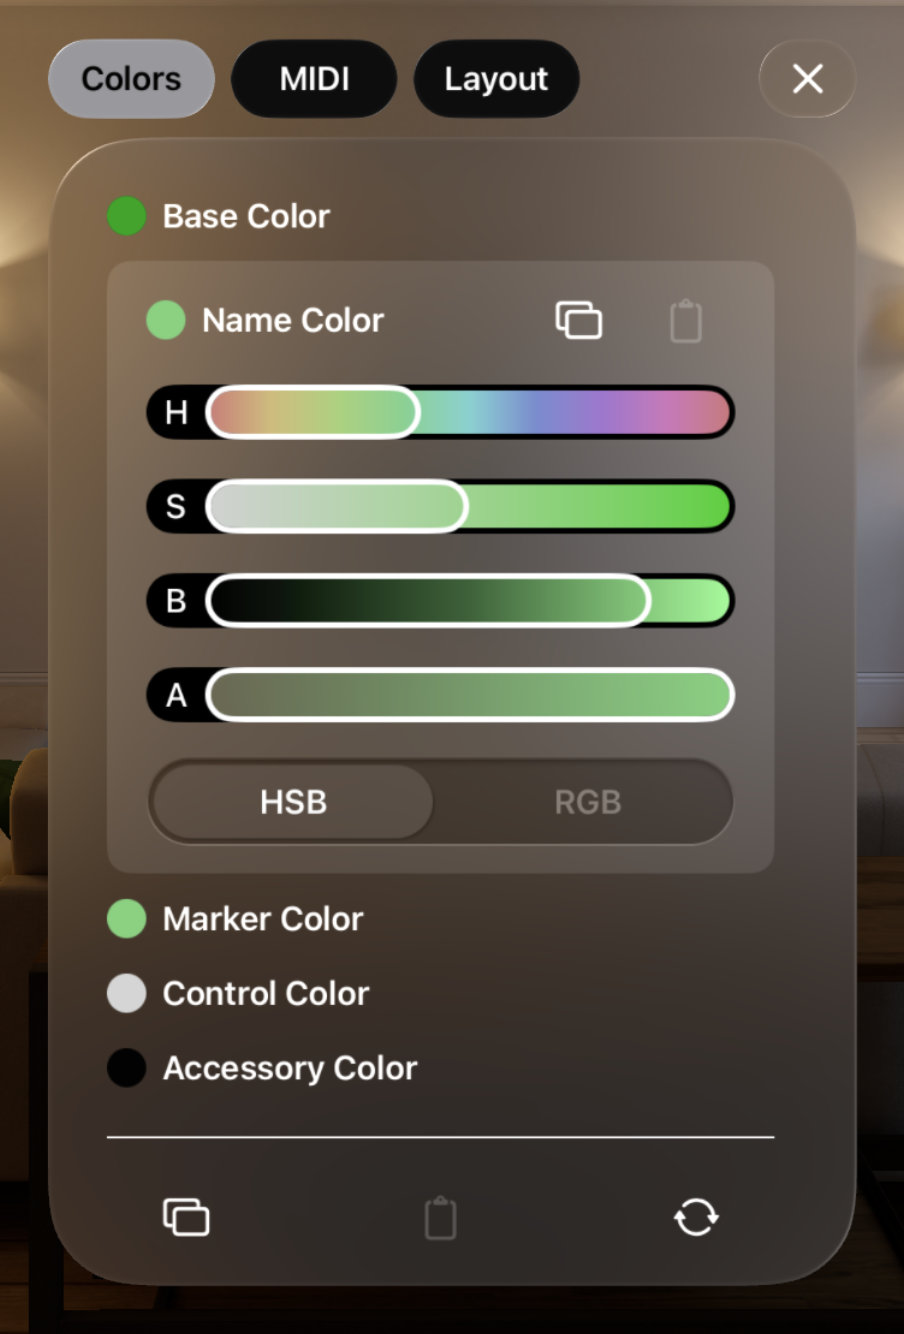 Colors Name Color